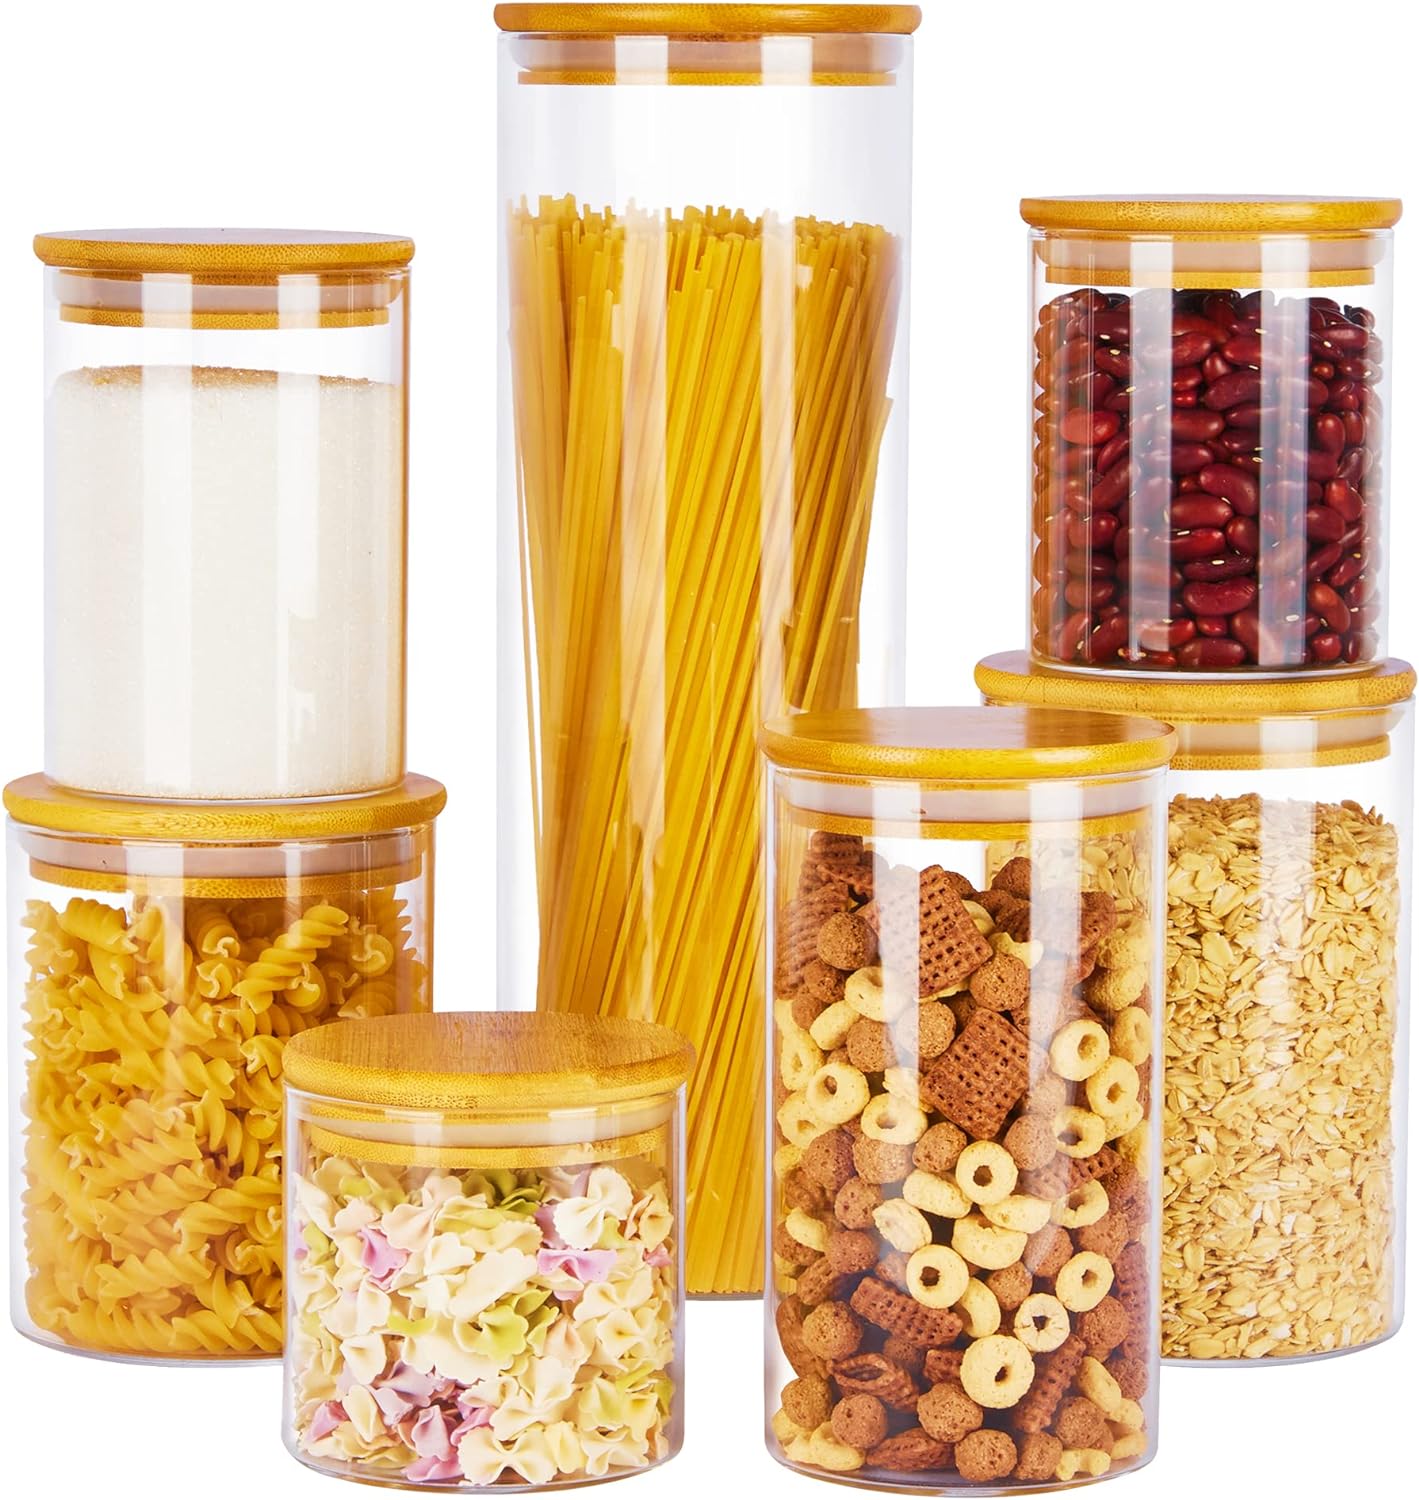 7 Pack Glass with Bamboo Lids Food Containers for Pasta, Cookies, Nuts, Coffee Beans, Cereal, Glass Canisters for Pantry Organization